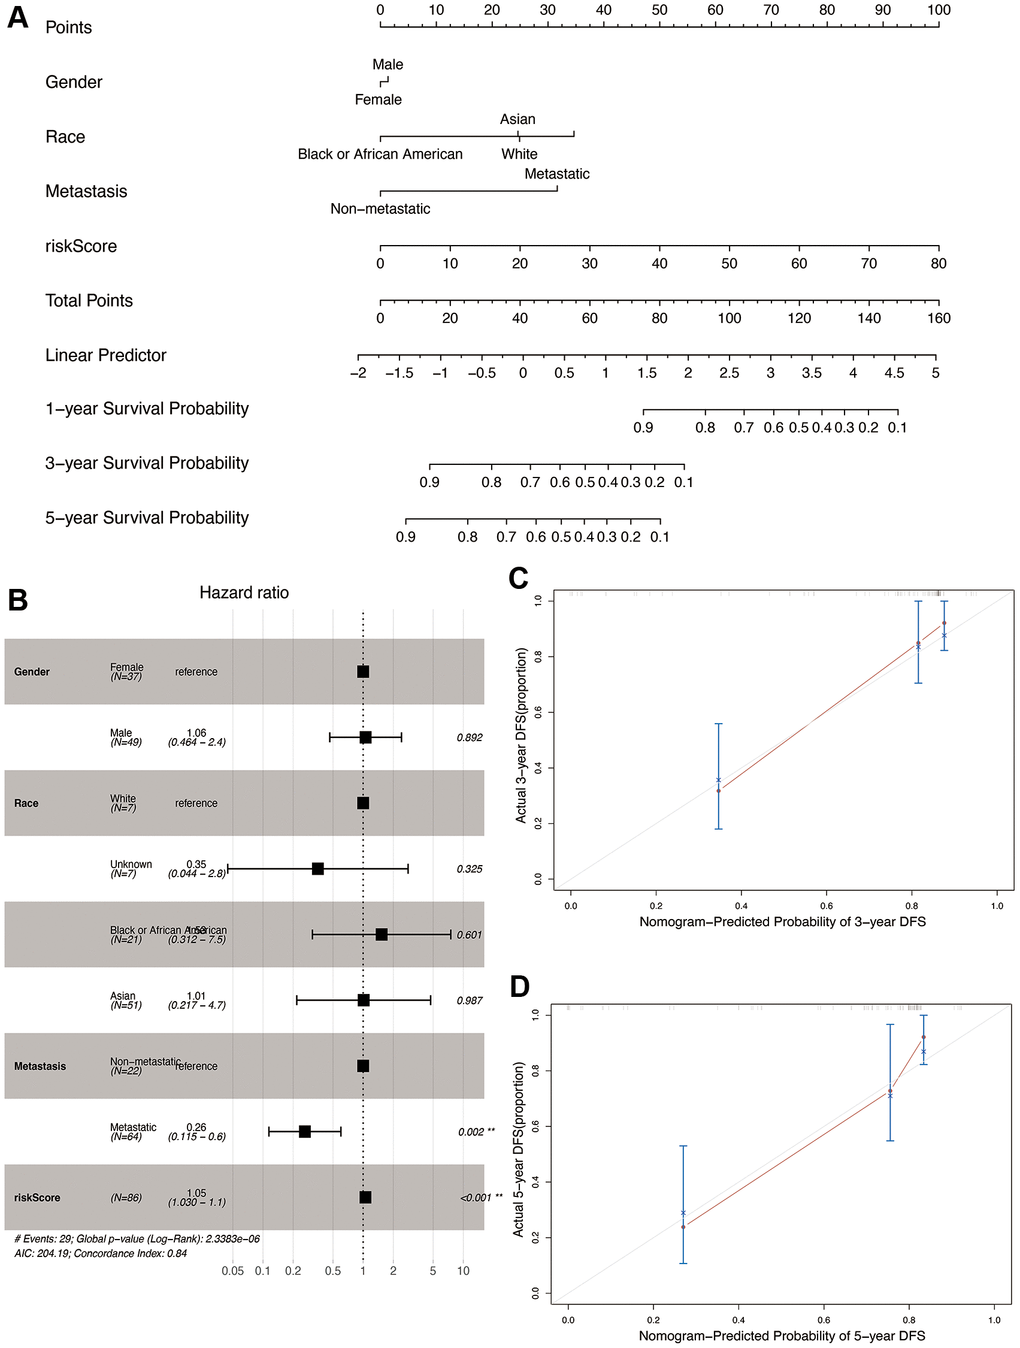 Construction and validation of the nomogram in the TARGET cohort. (A) Nomogram combining OS-related risk score and clinical characteristics for predicting 1-, 3-, and 5-year overall survival of osteosarcoma patients. (B) Forest plot showing results of multivariable cox regression of the nomogram. (C, D) The calibration curves for 3- and 5-year overall survival probability.